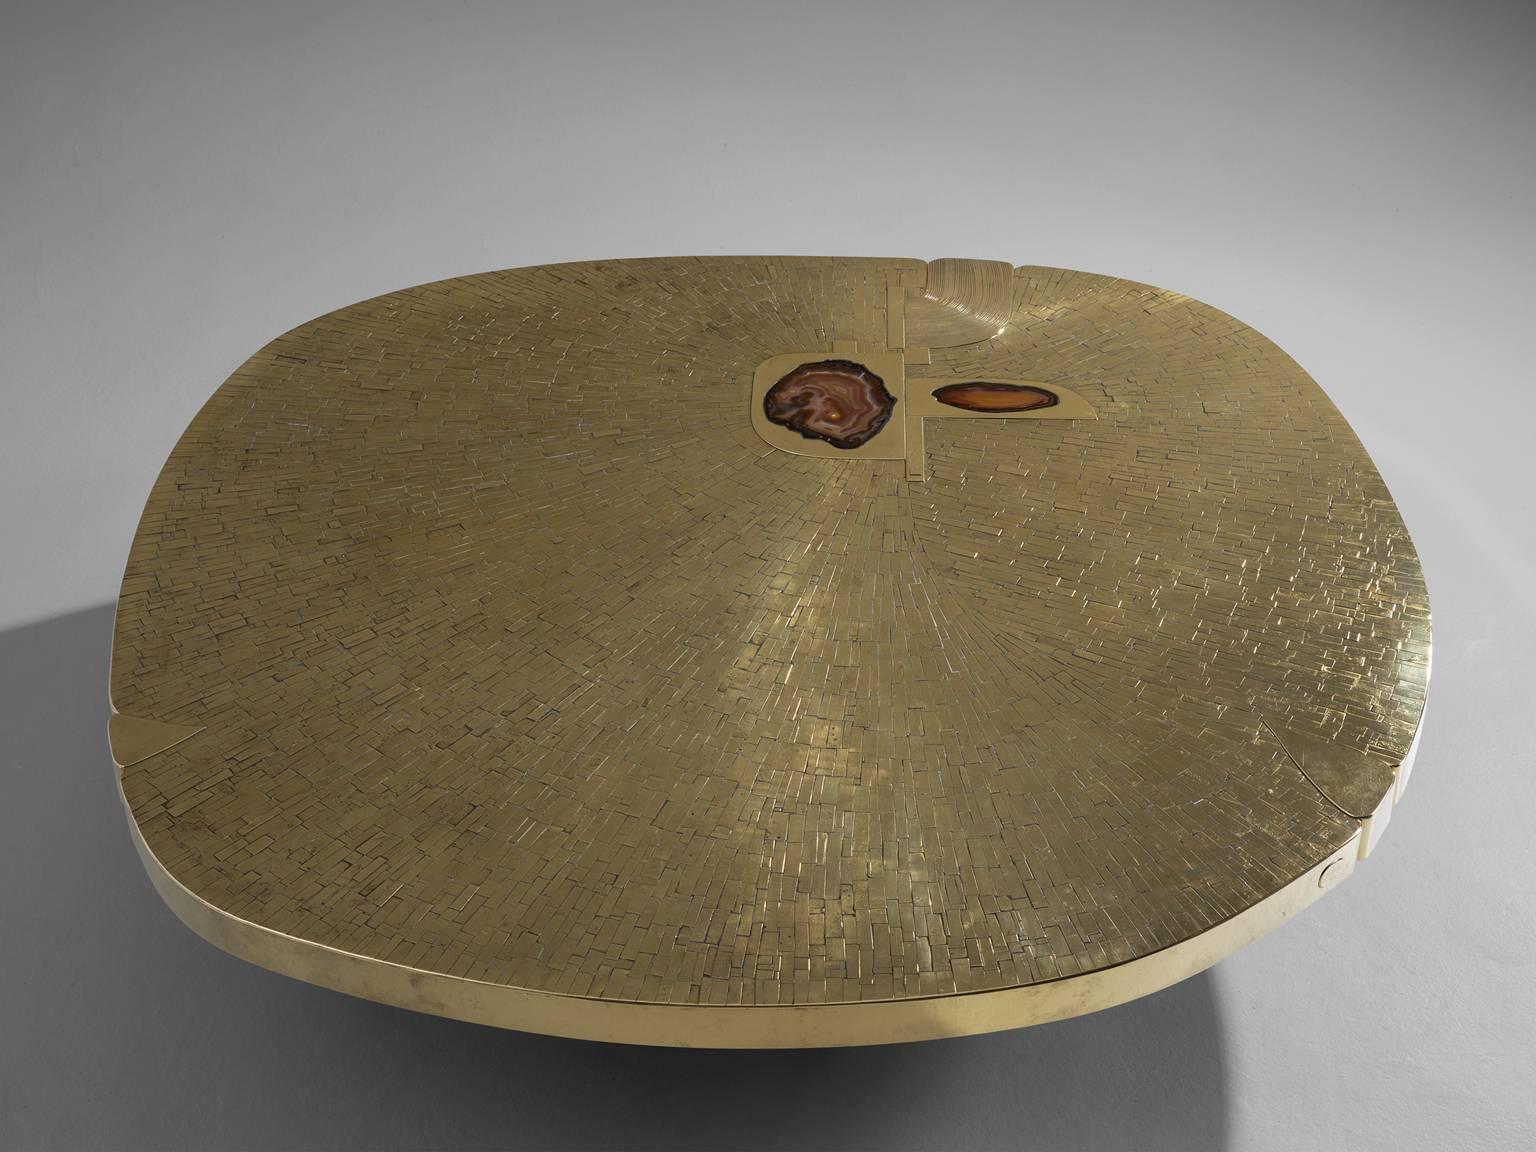 Coffee table, in brass and agate, by Jean Claude Dresse, Belgium, circa 1970.

Sculptural coffee table for a private commission for an important Parisian interior. Applied brass tiles with agate and etched details. Signed on the side of the